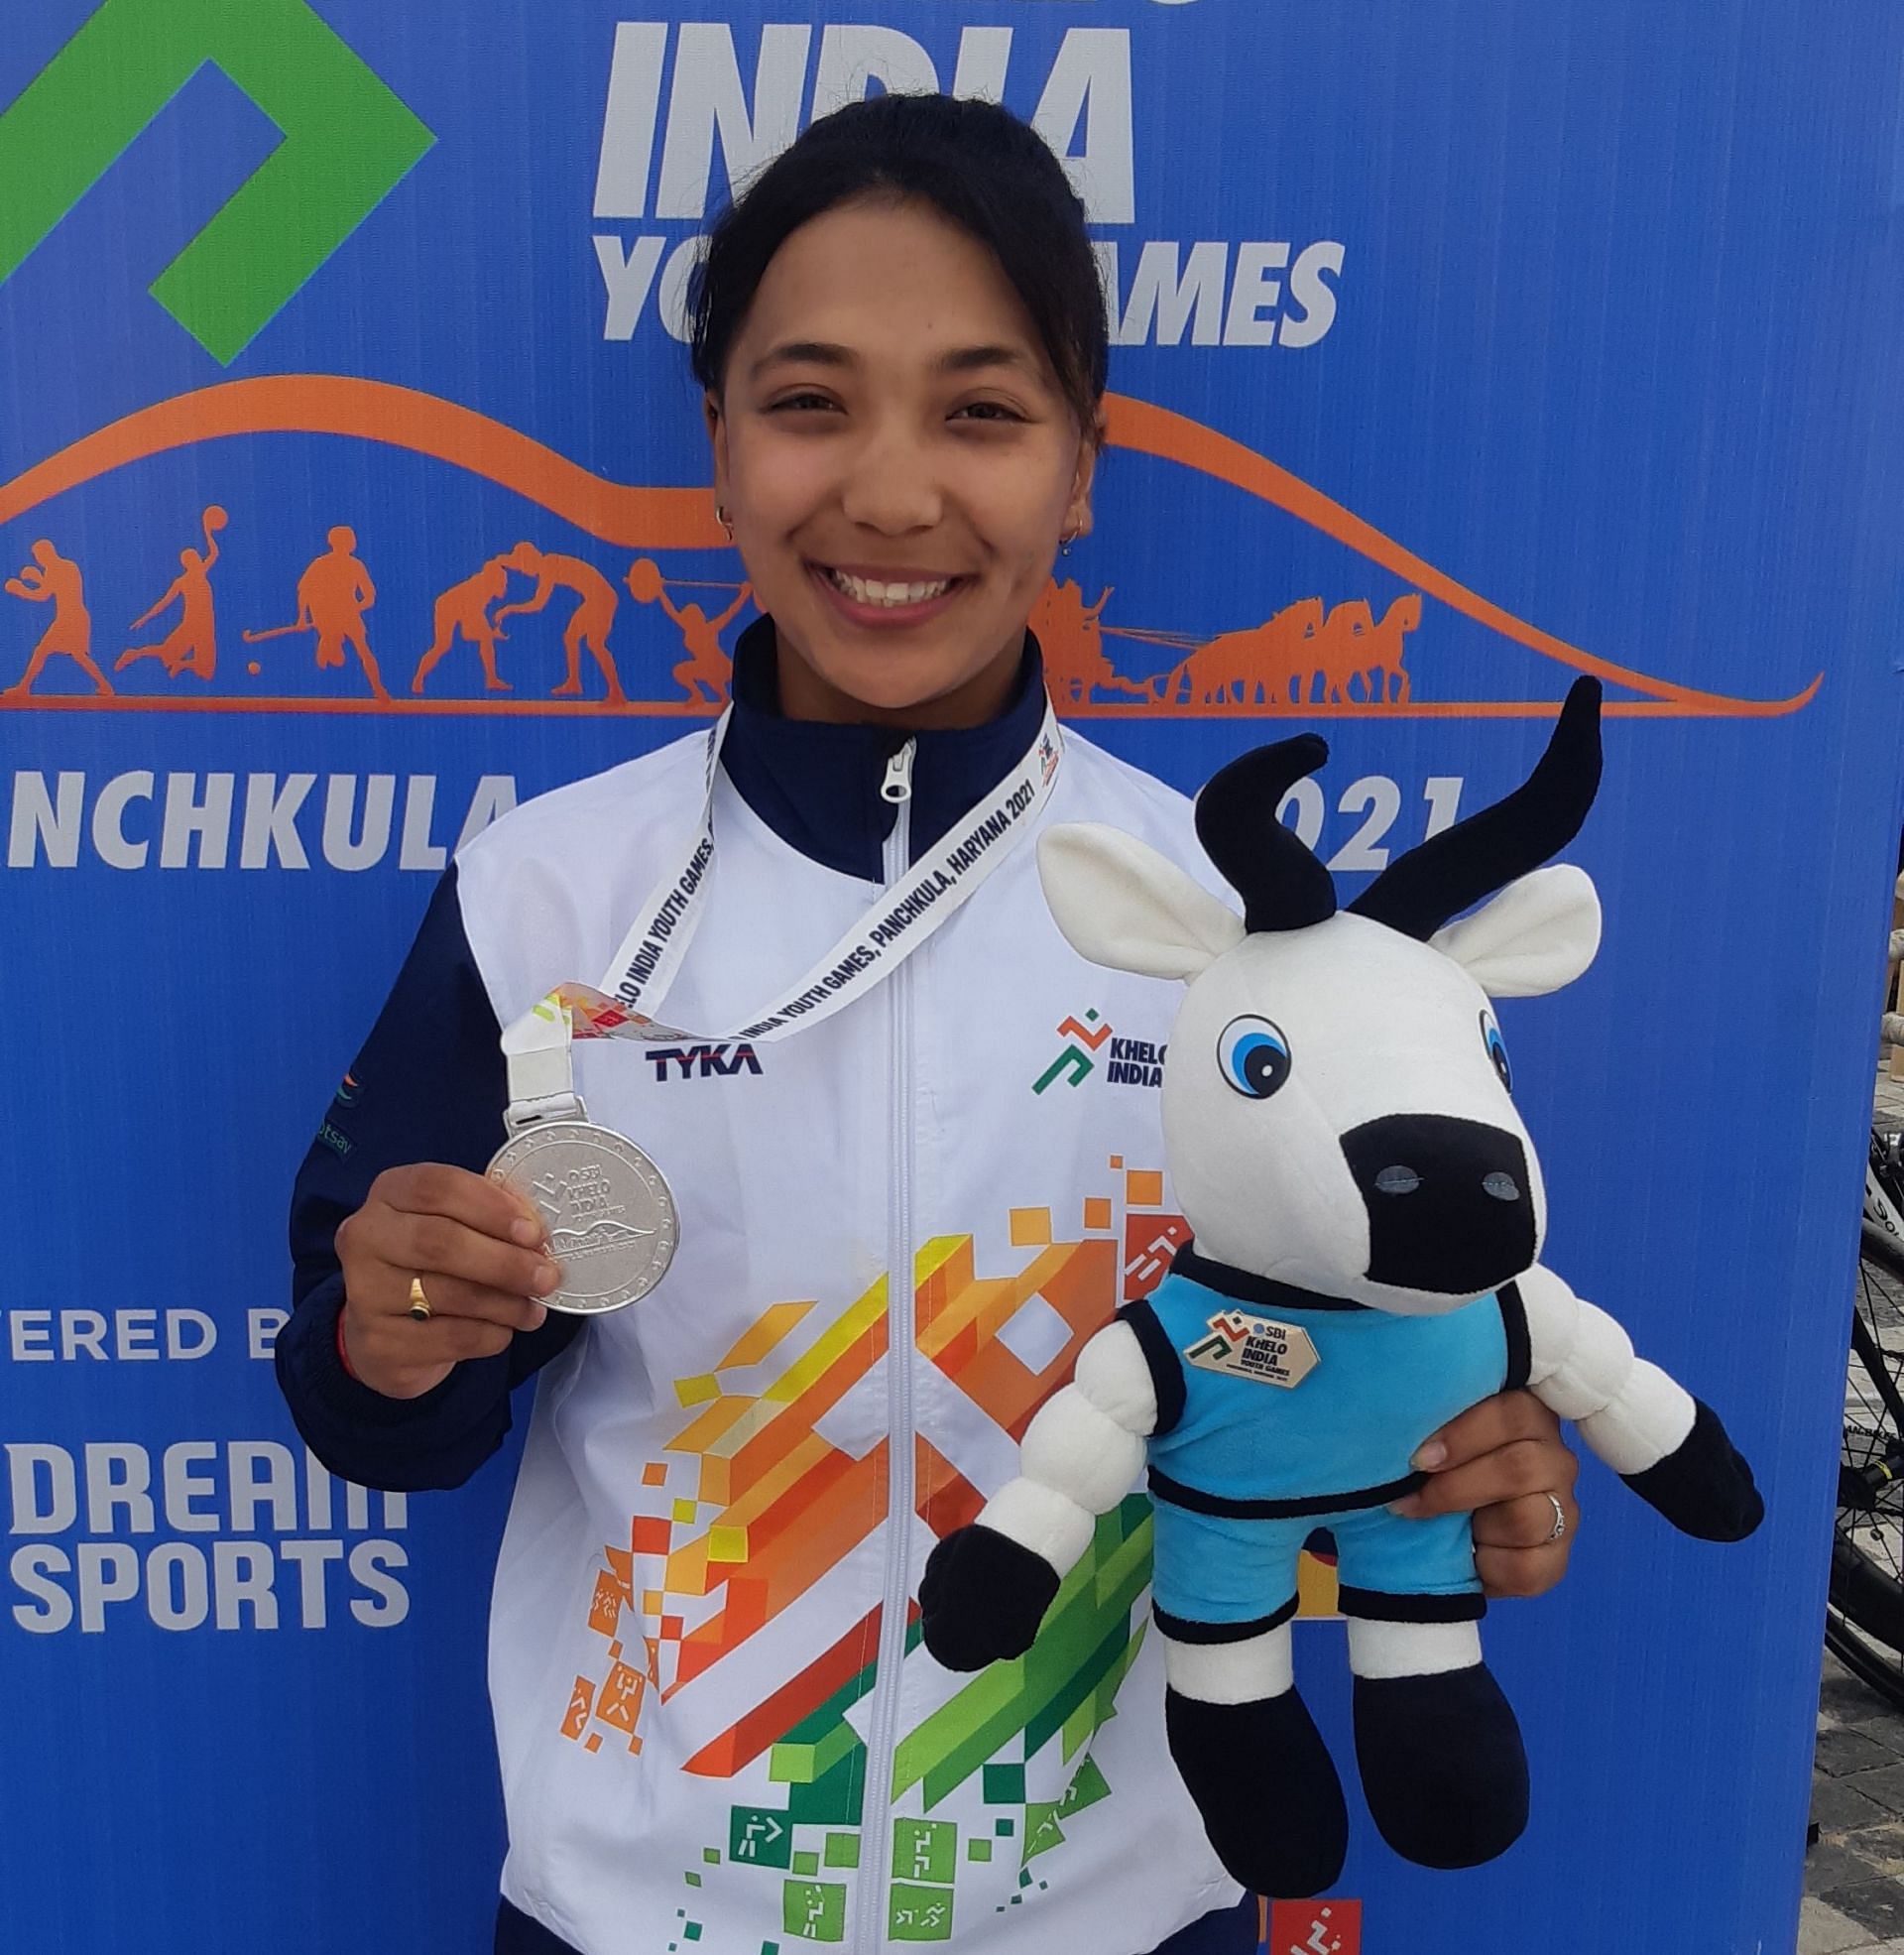 Ladakh cyclist Leakzes Angmo after winning silver in the Khelo India Youth Games. (PC: Khelo India)